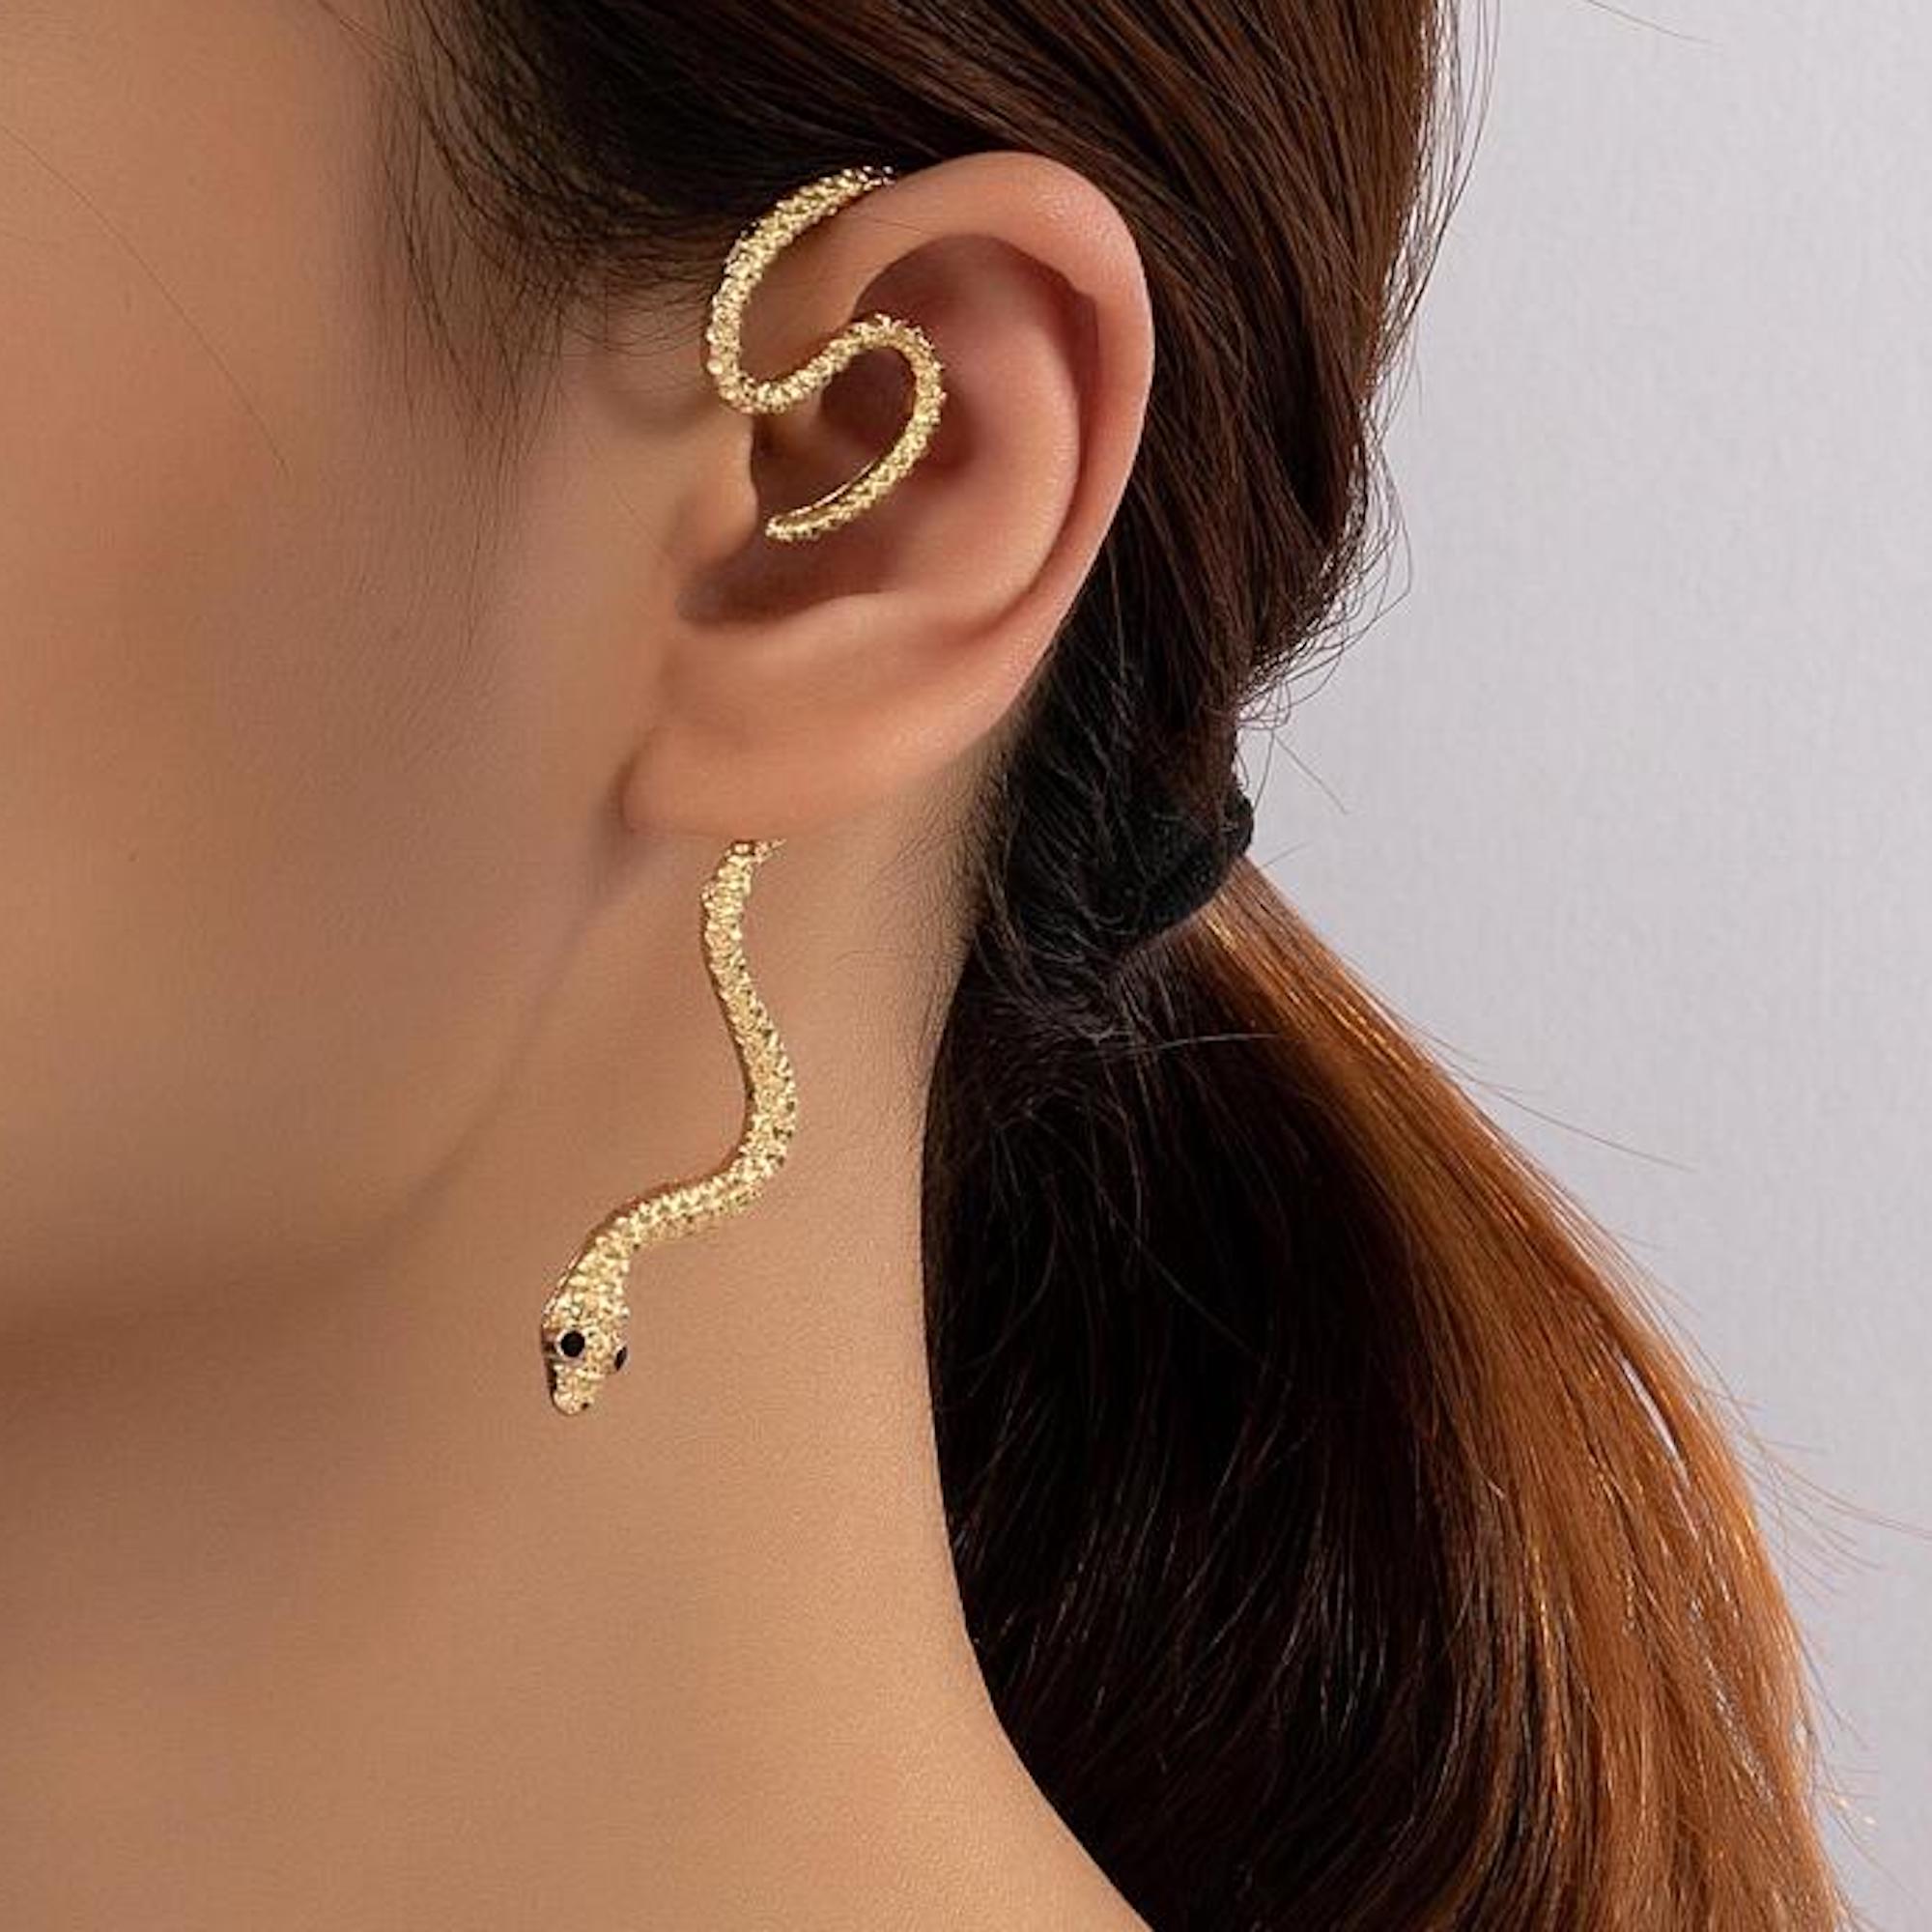 Ear Cuffs | Gold Textured | Contemporary – Equiivalence